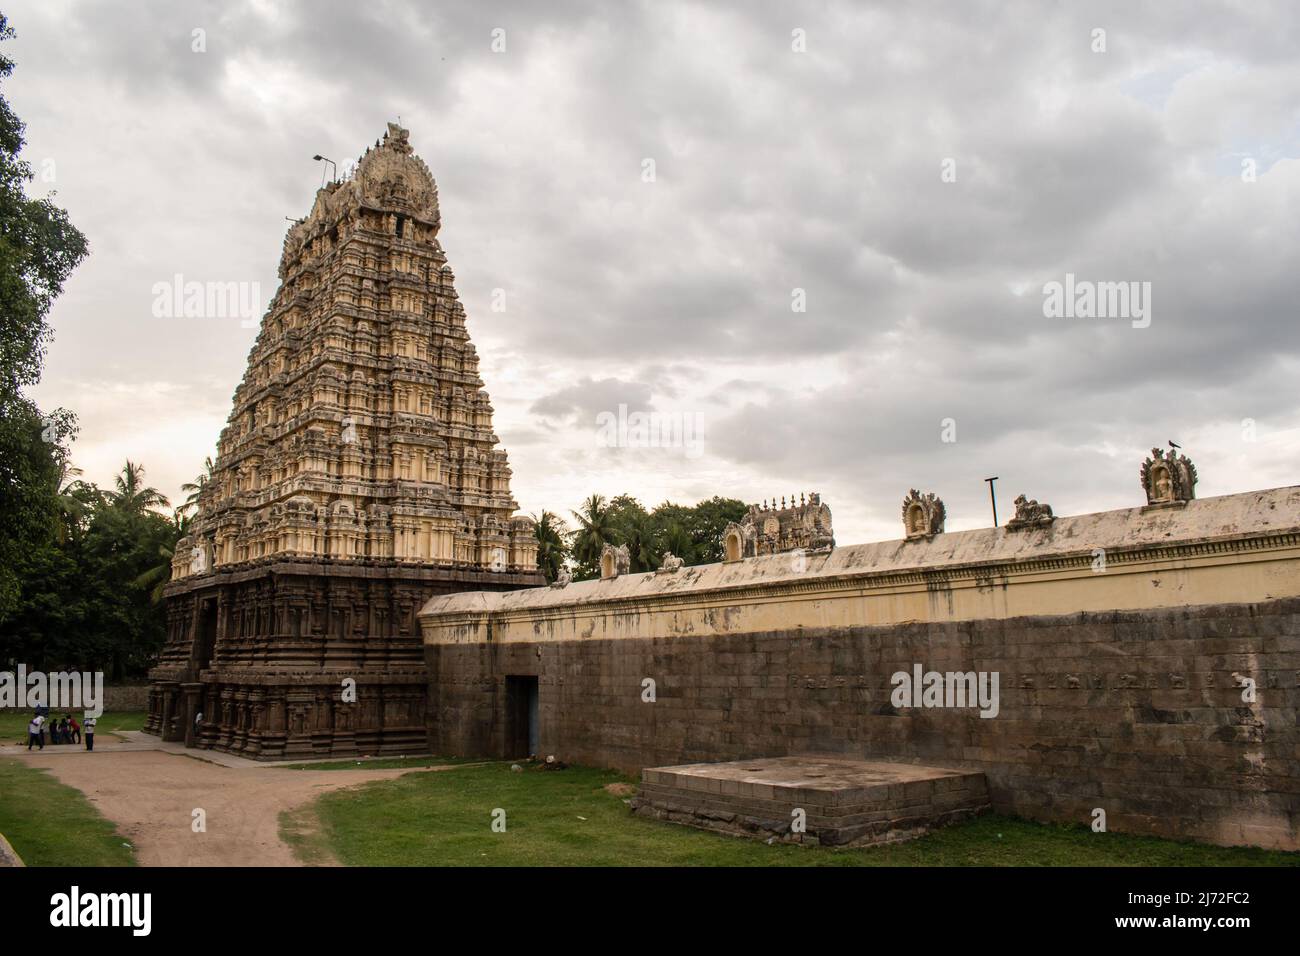 Vellore, Tamil Nadu, India - September 2018: The tower spire of the ancient Hindu Jalakanteswarar temple inside the Vellore Fort complex. Stock Photo